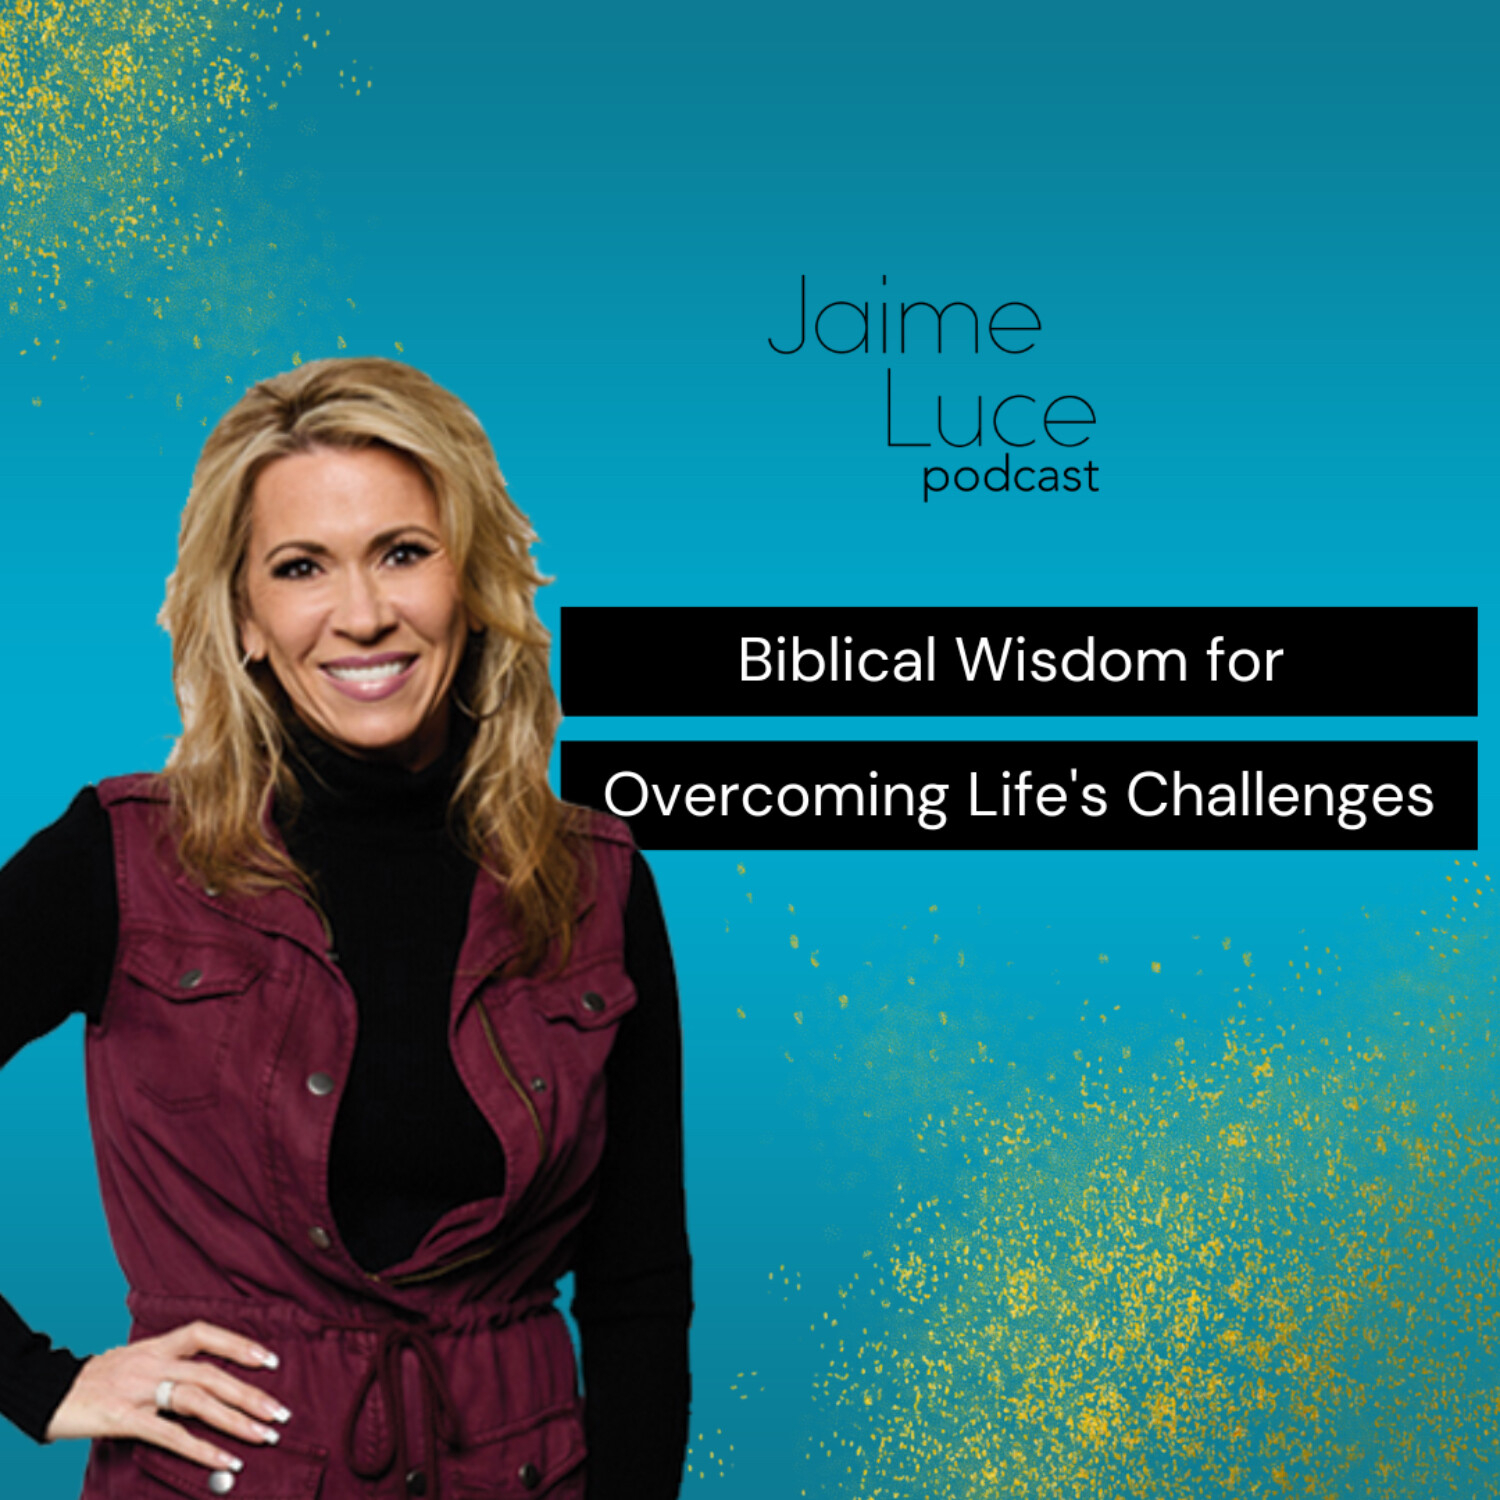 Biblical Wisdom for Overcoming Life's Challenges